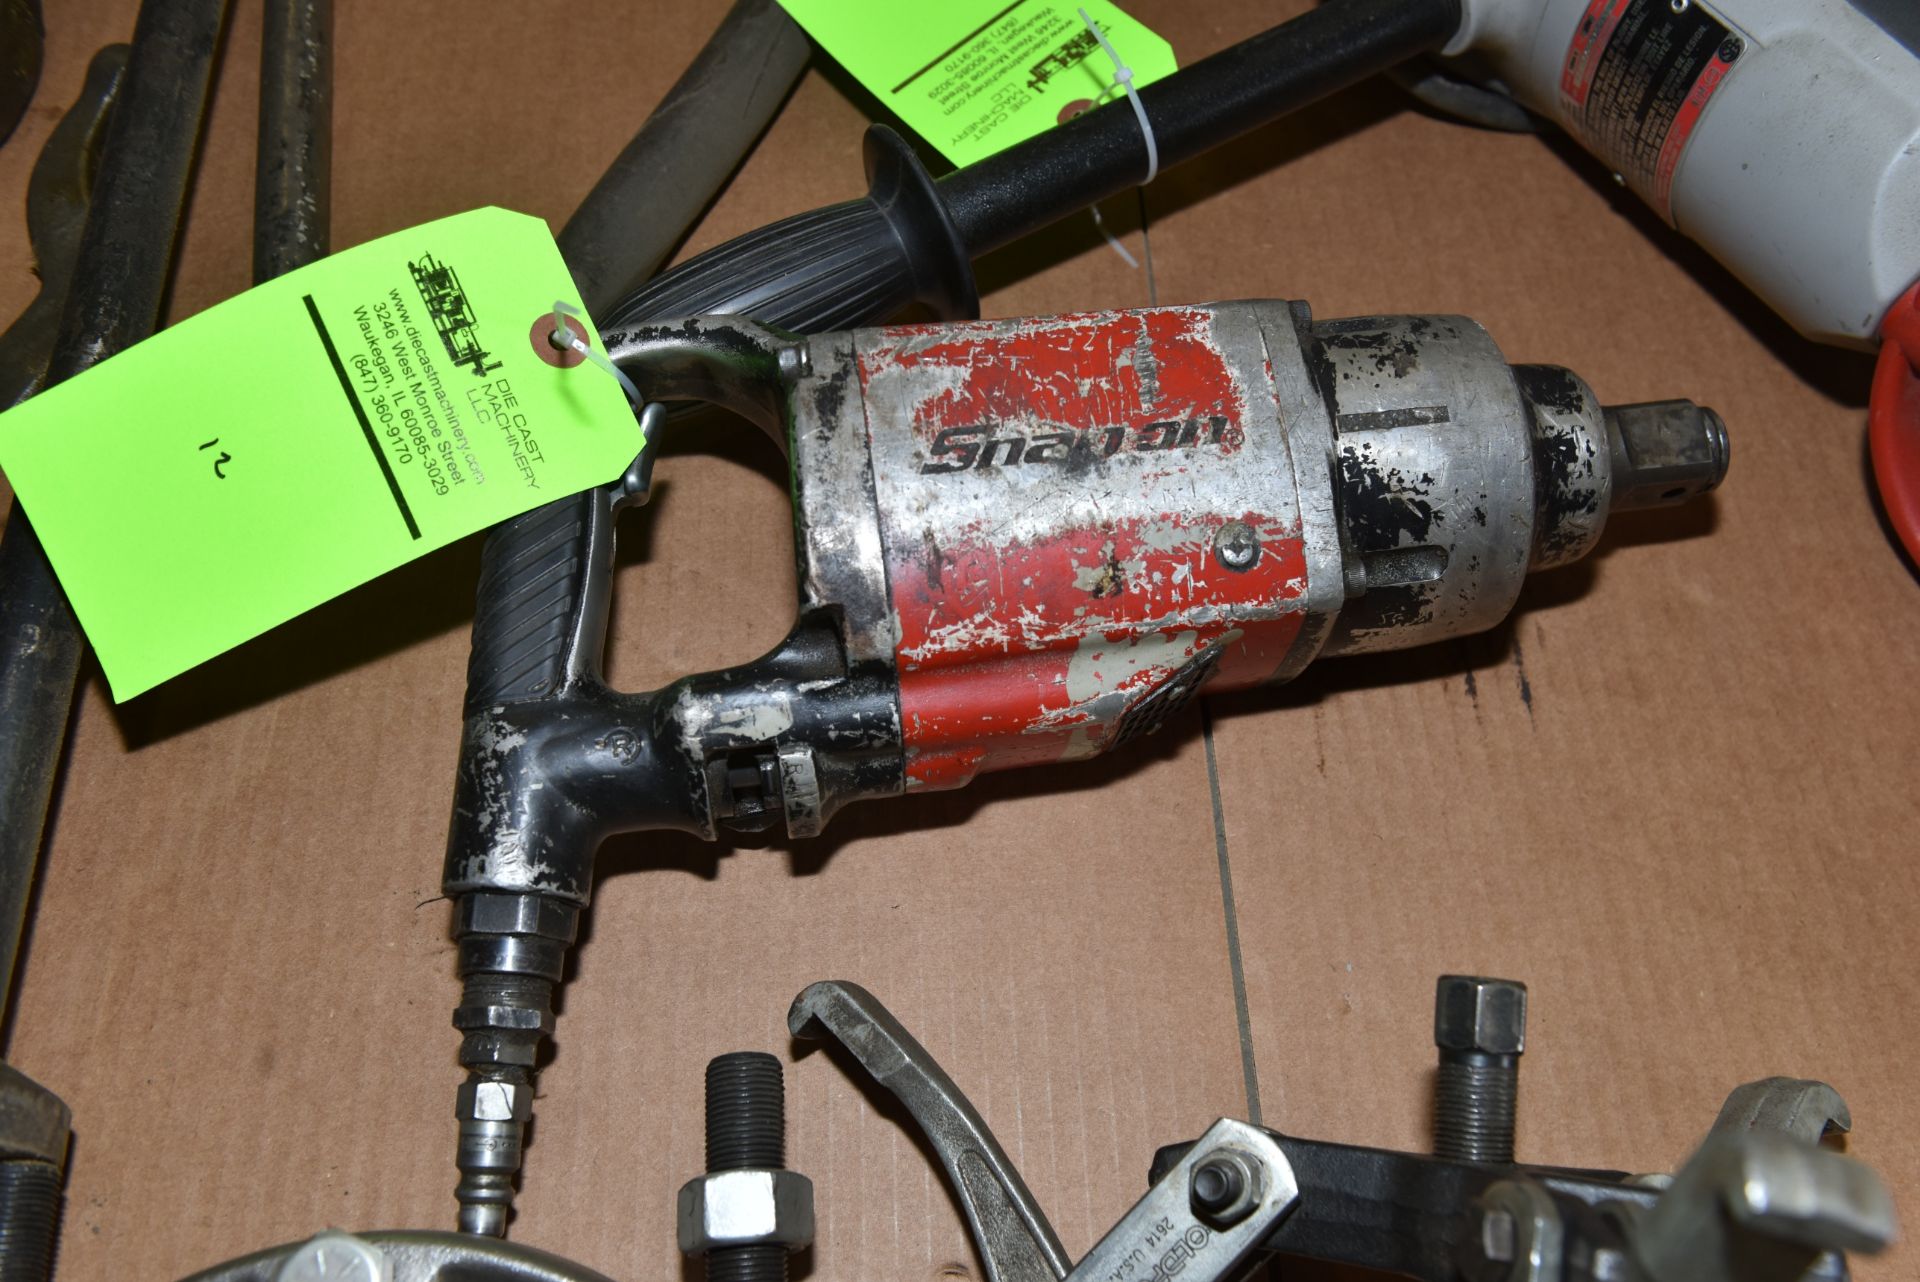 Snap On IM 1800 1" Impact Wrench